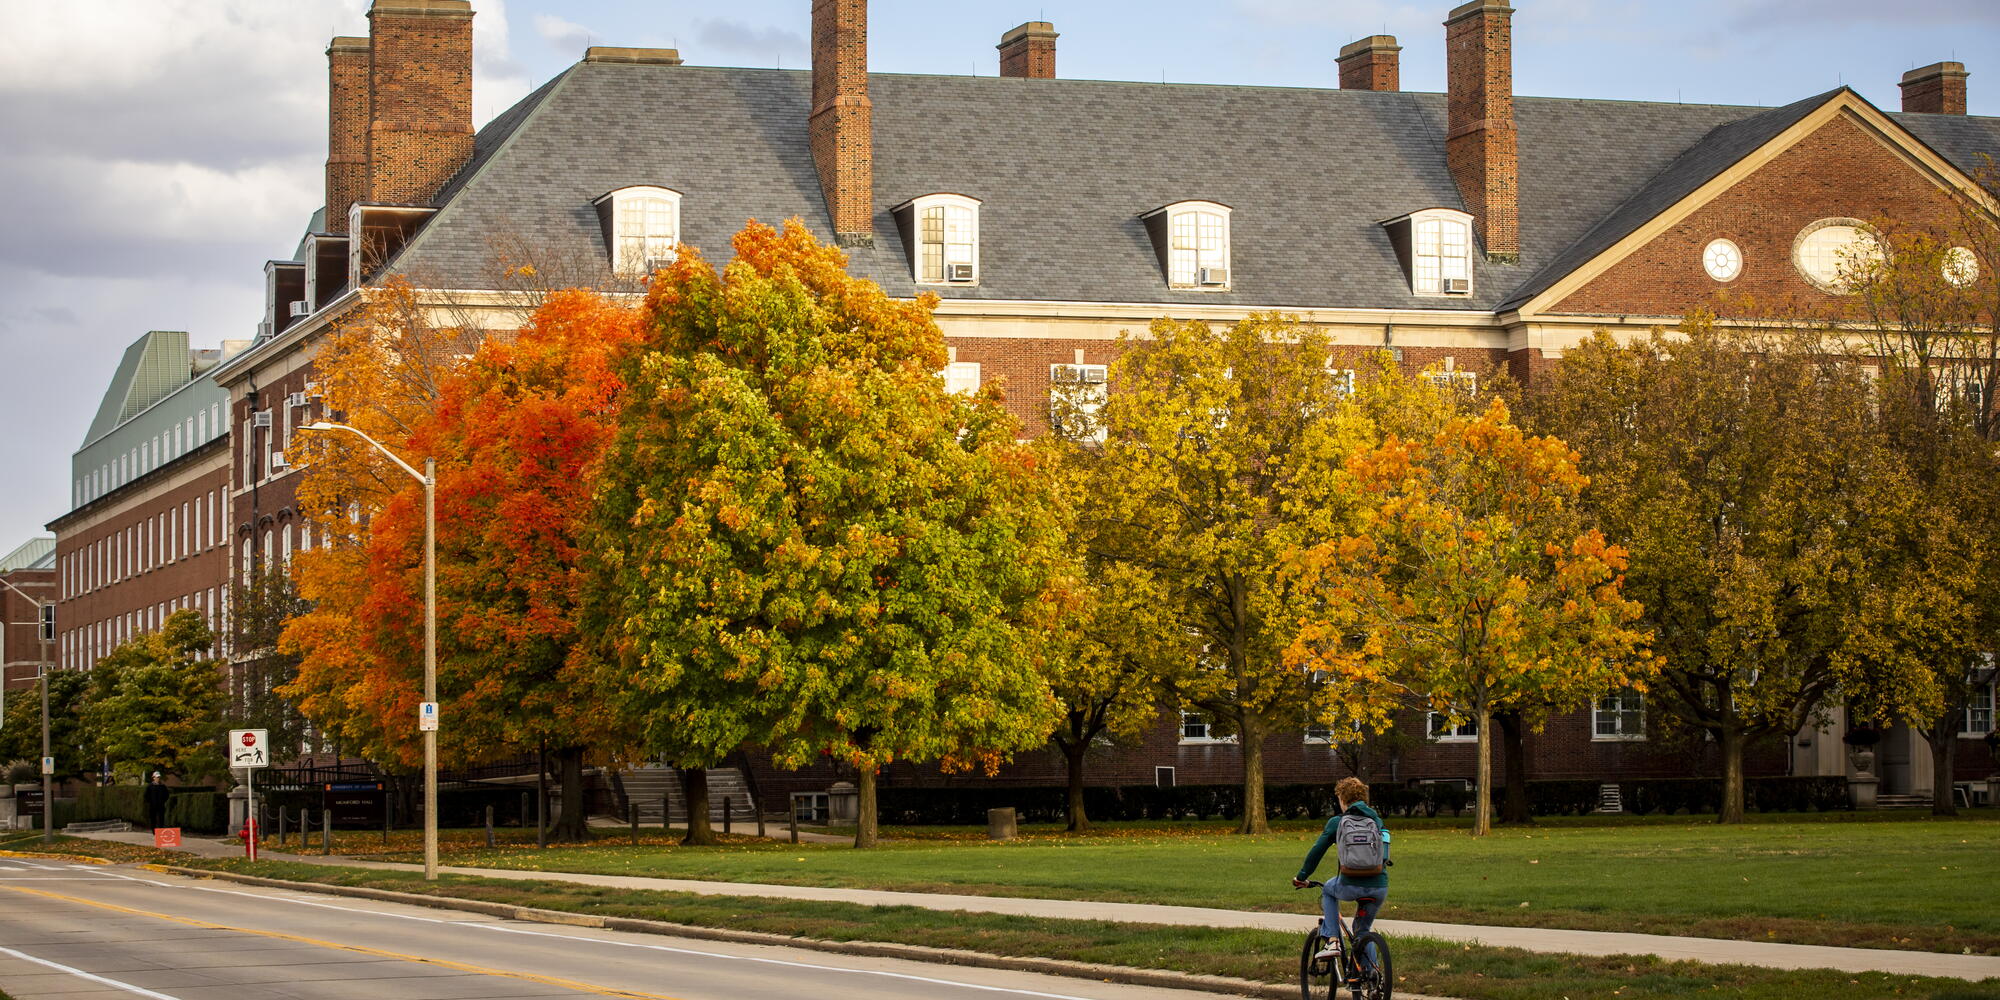 Autumn landscape with the library building and a person riding a bike